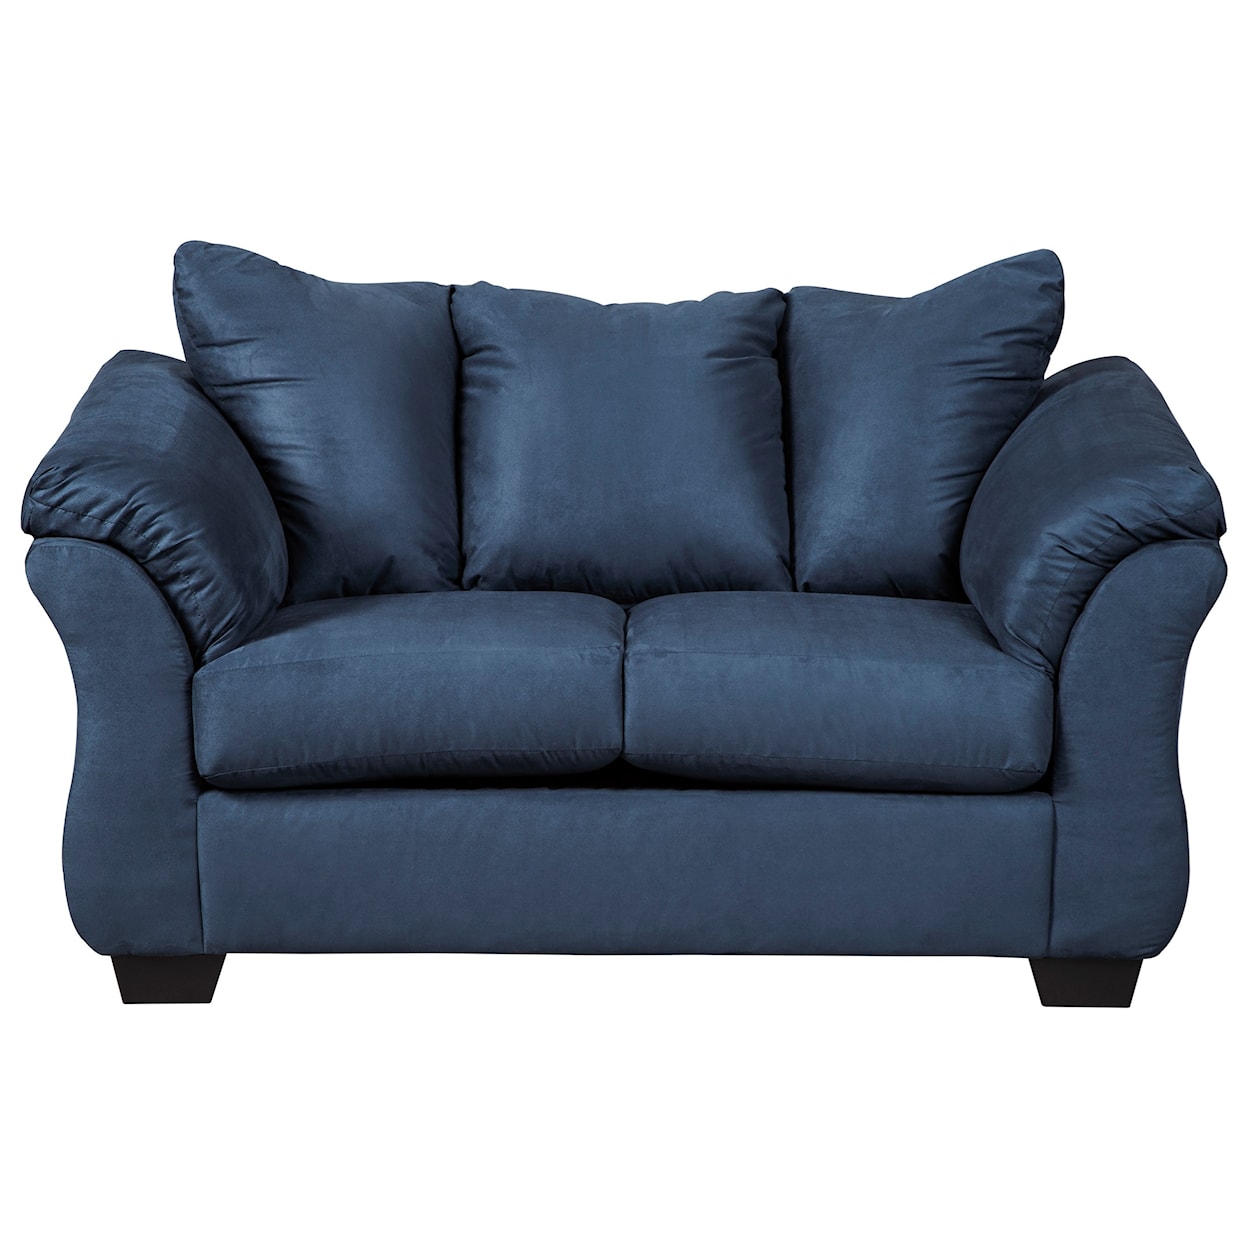 Signature Design by Ashley Darcy Stationary Loveseat